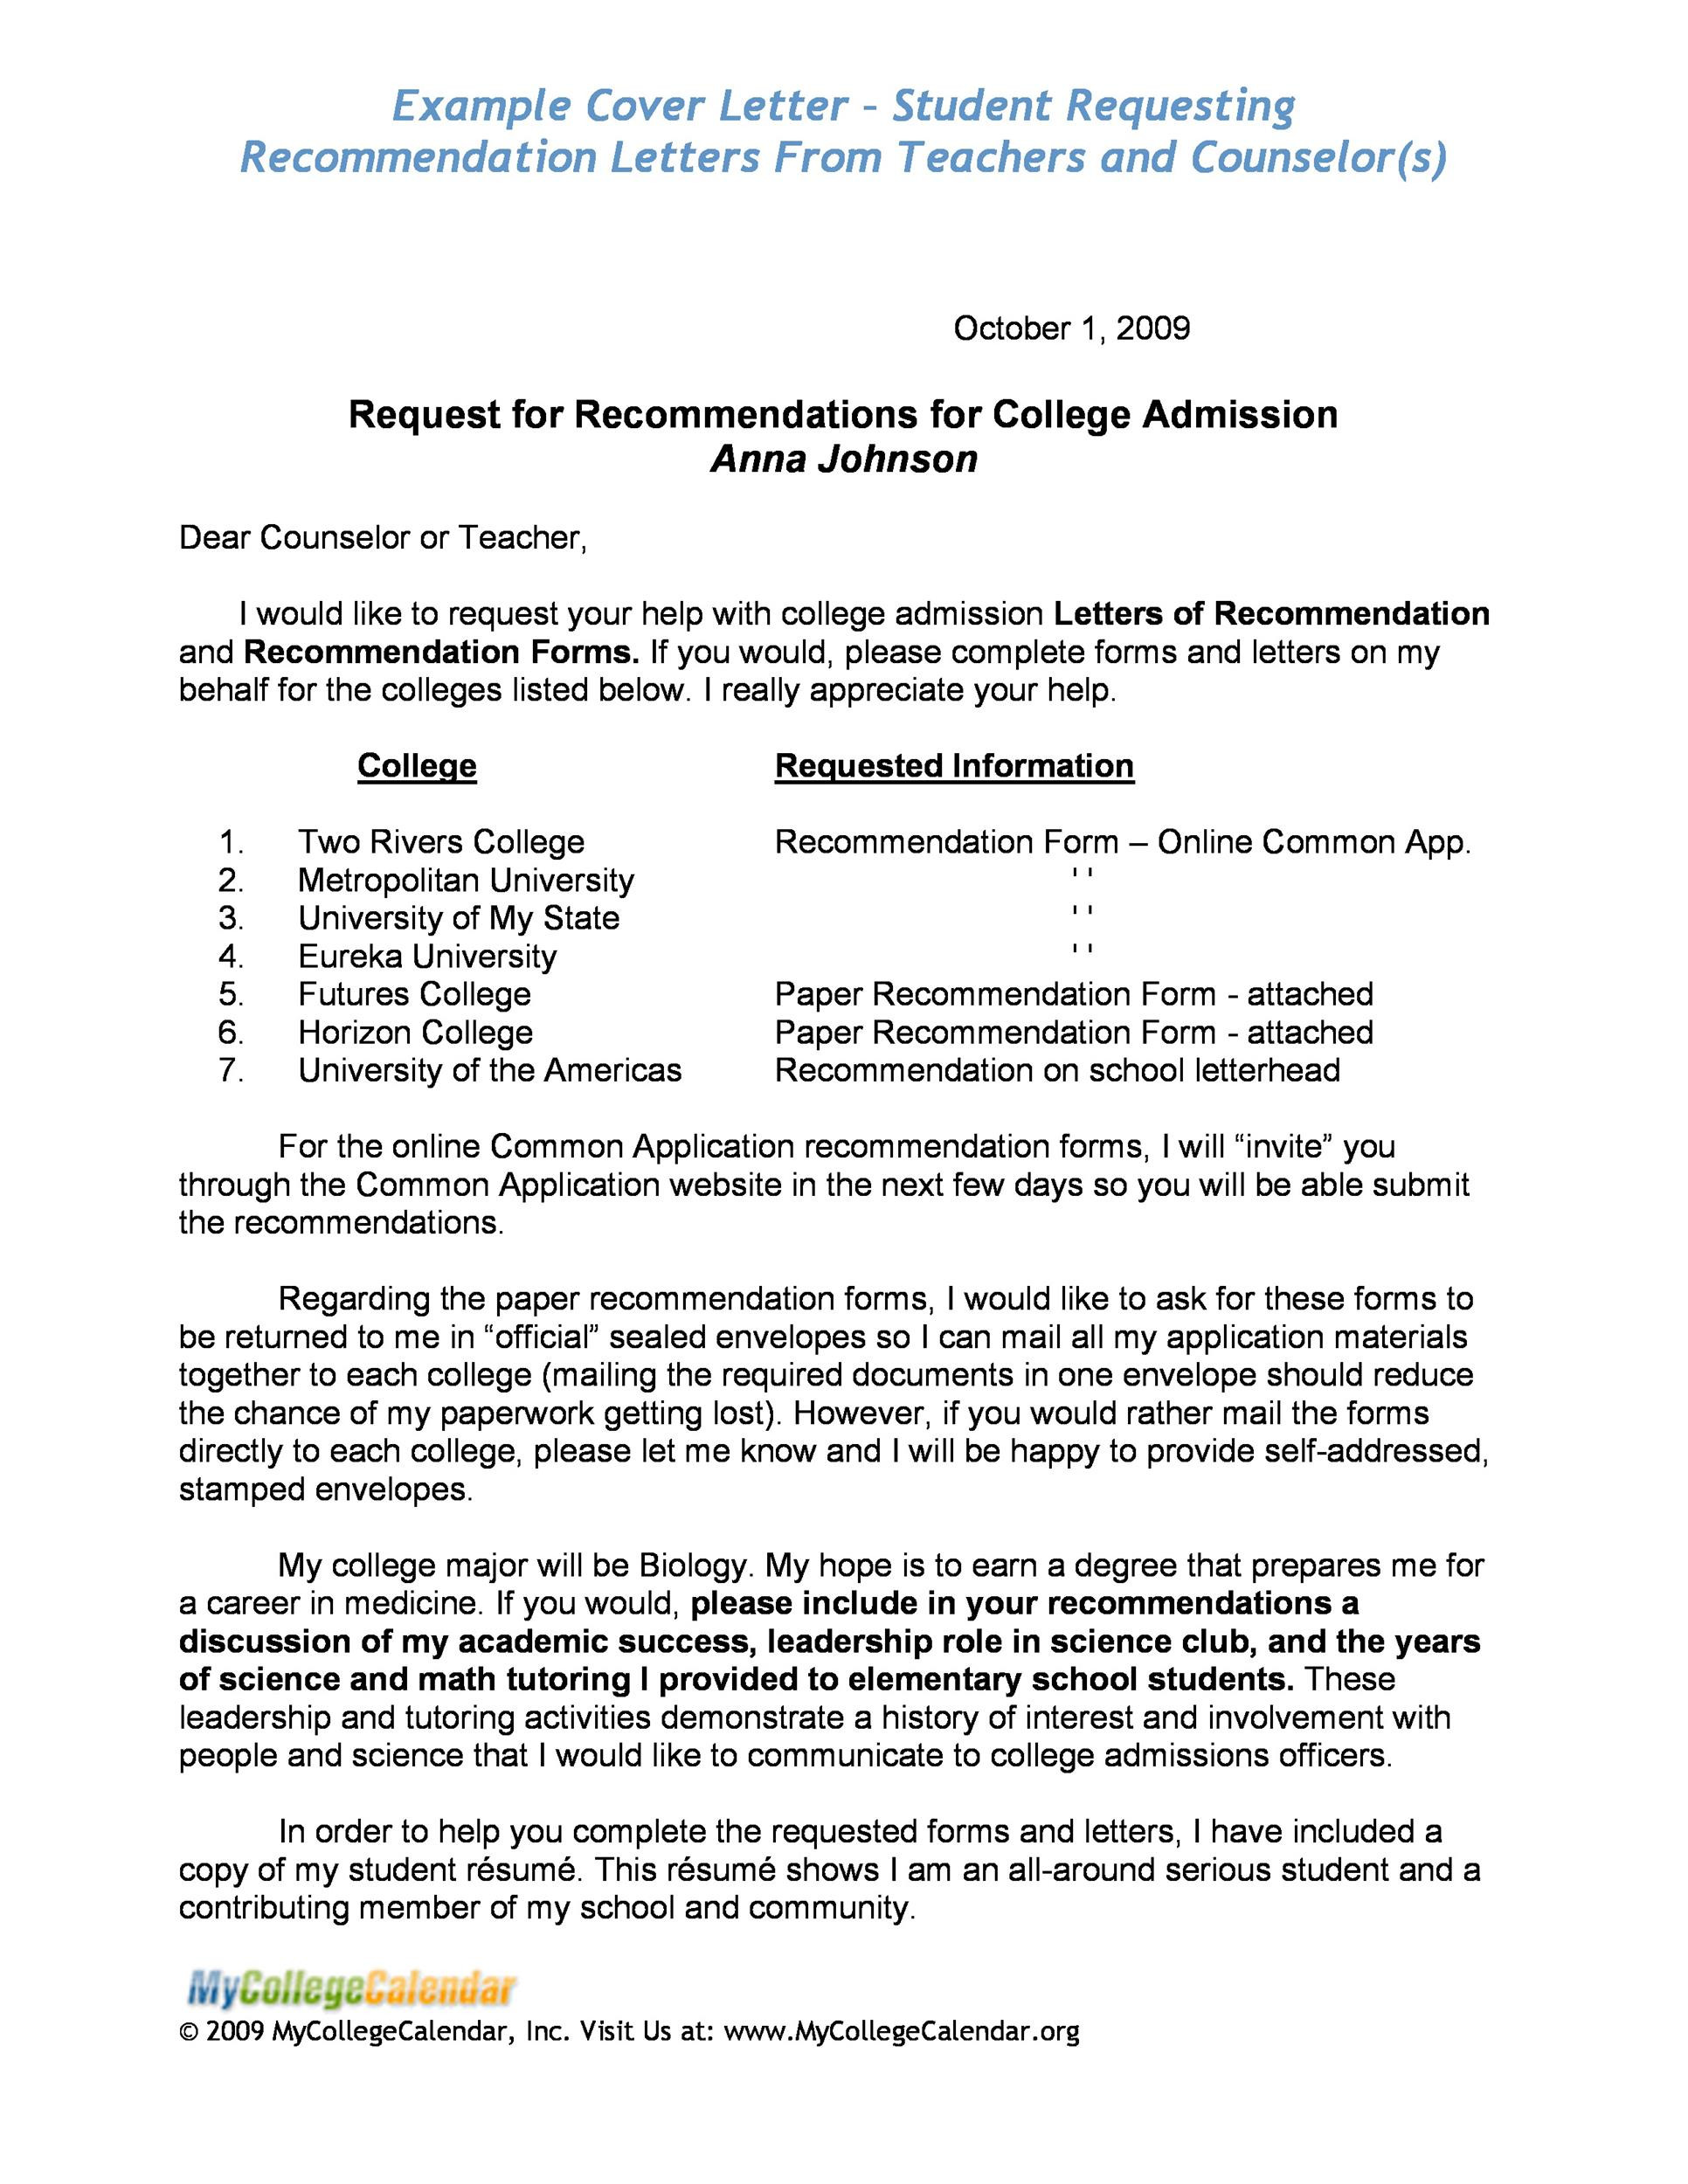 examples of resume letter for student